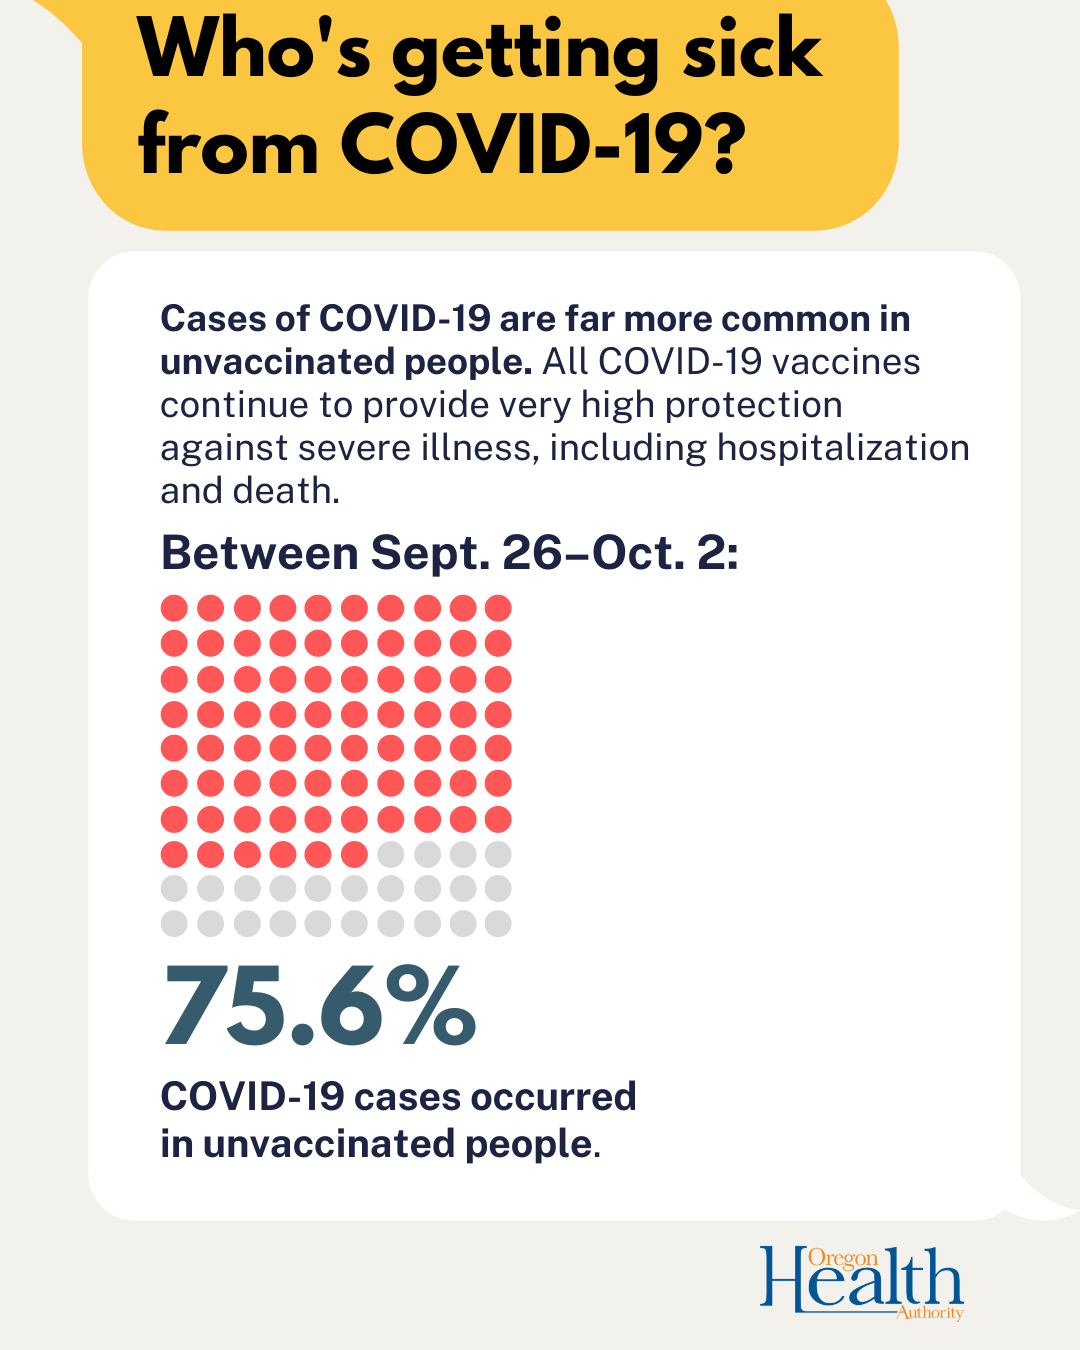 Report shows that rate of COVID-19 cases in unvaccinated people is currently approximately four times higher than in vaccinated people.